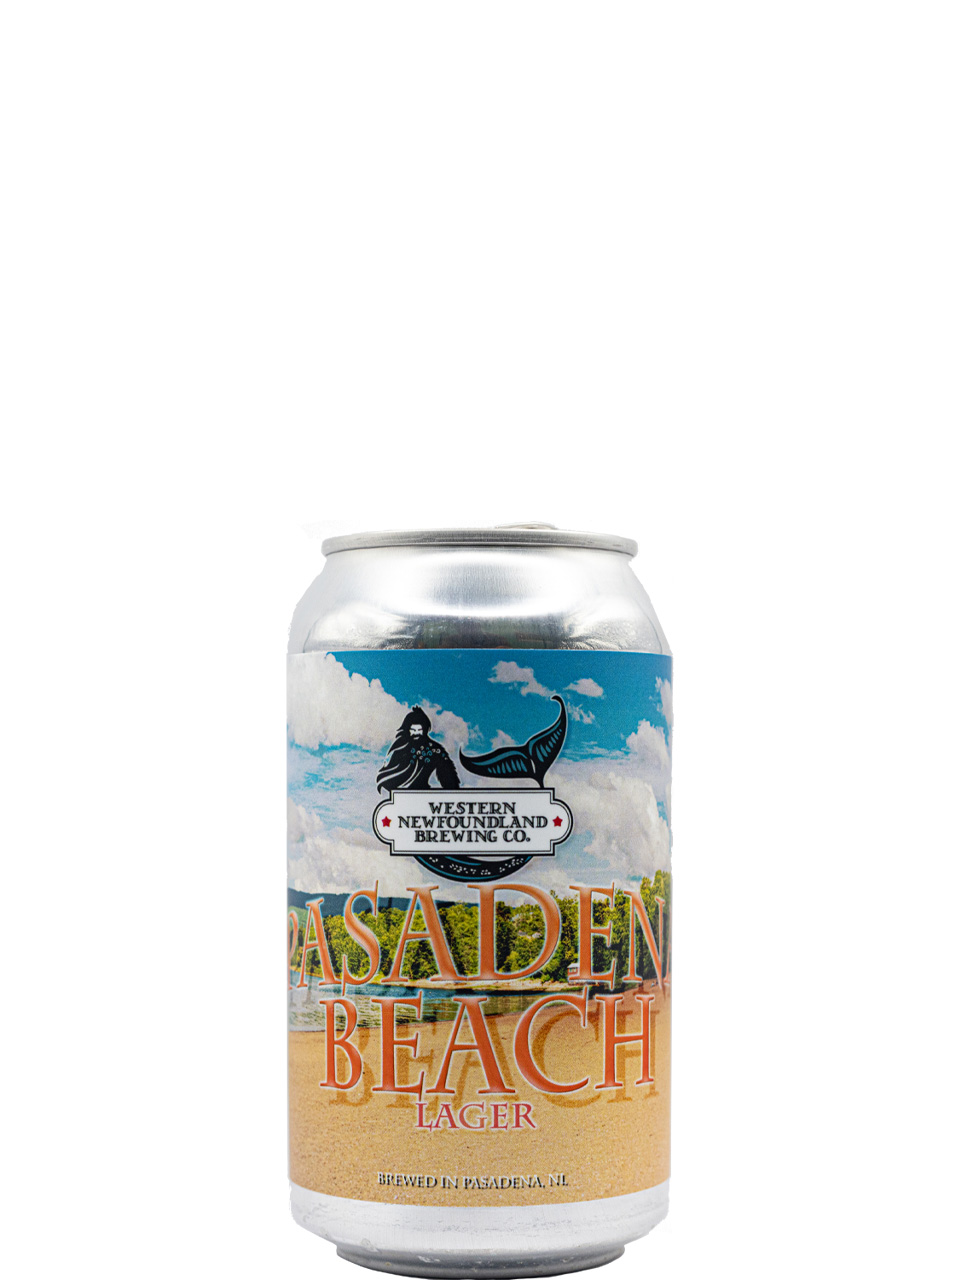 The Western NL Brewing Co Pasadena Beach Lager 355